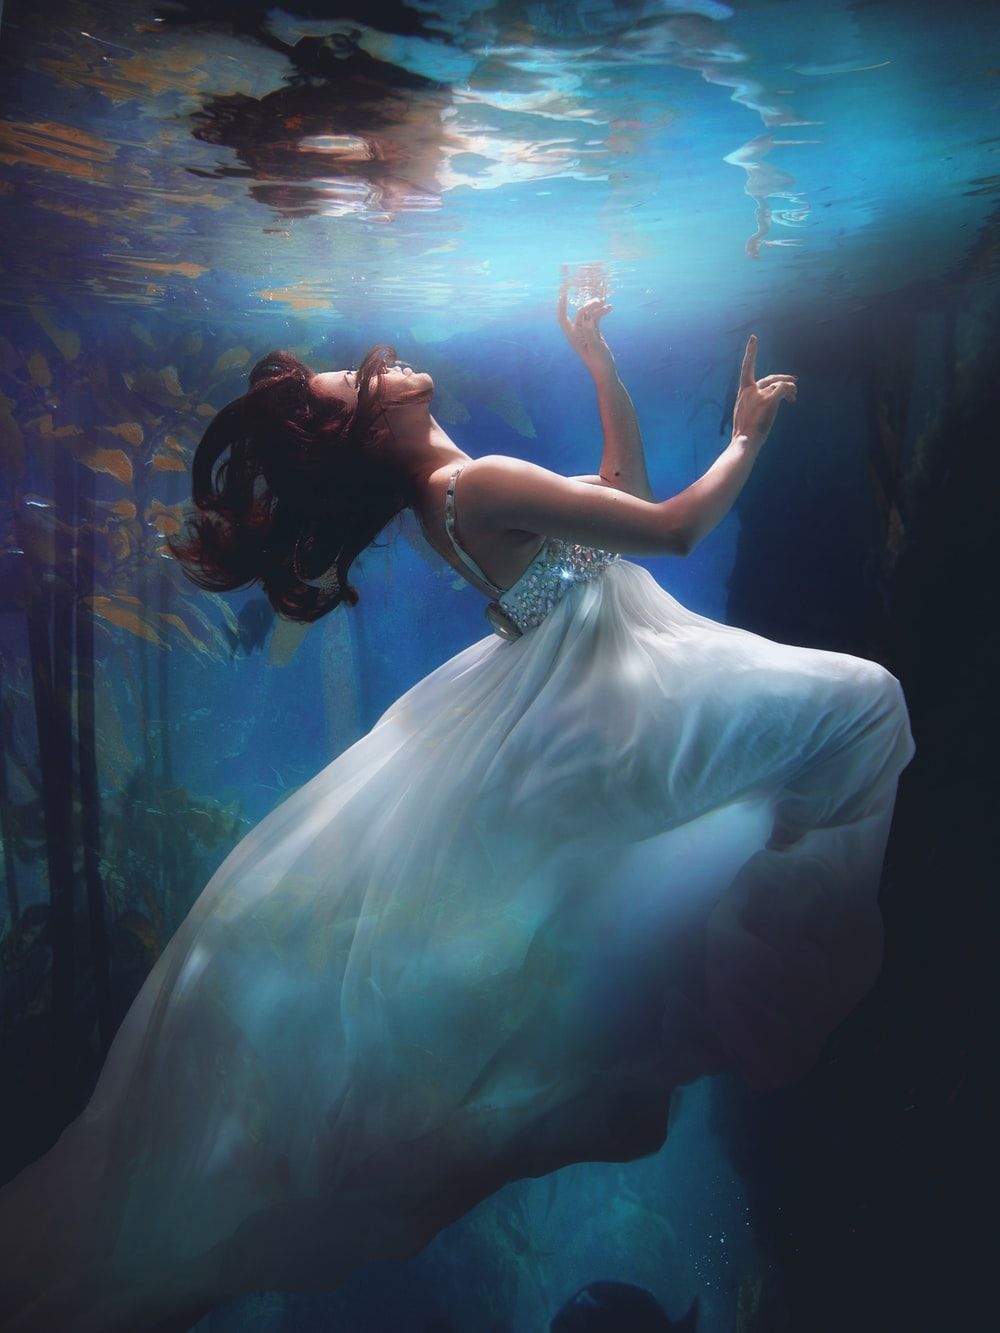 Underwater Girl Picture. Download Free Image